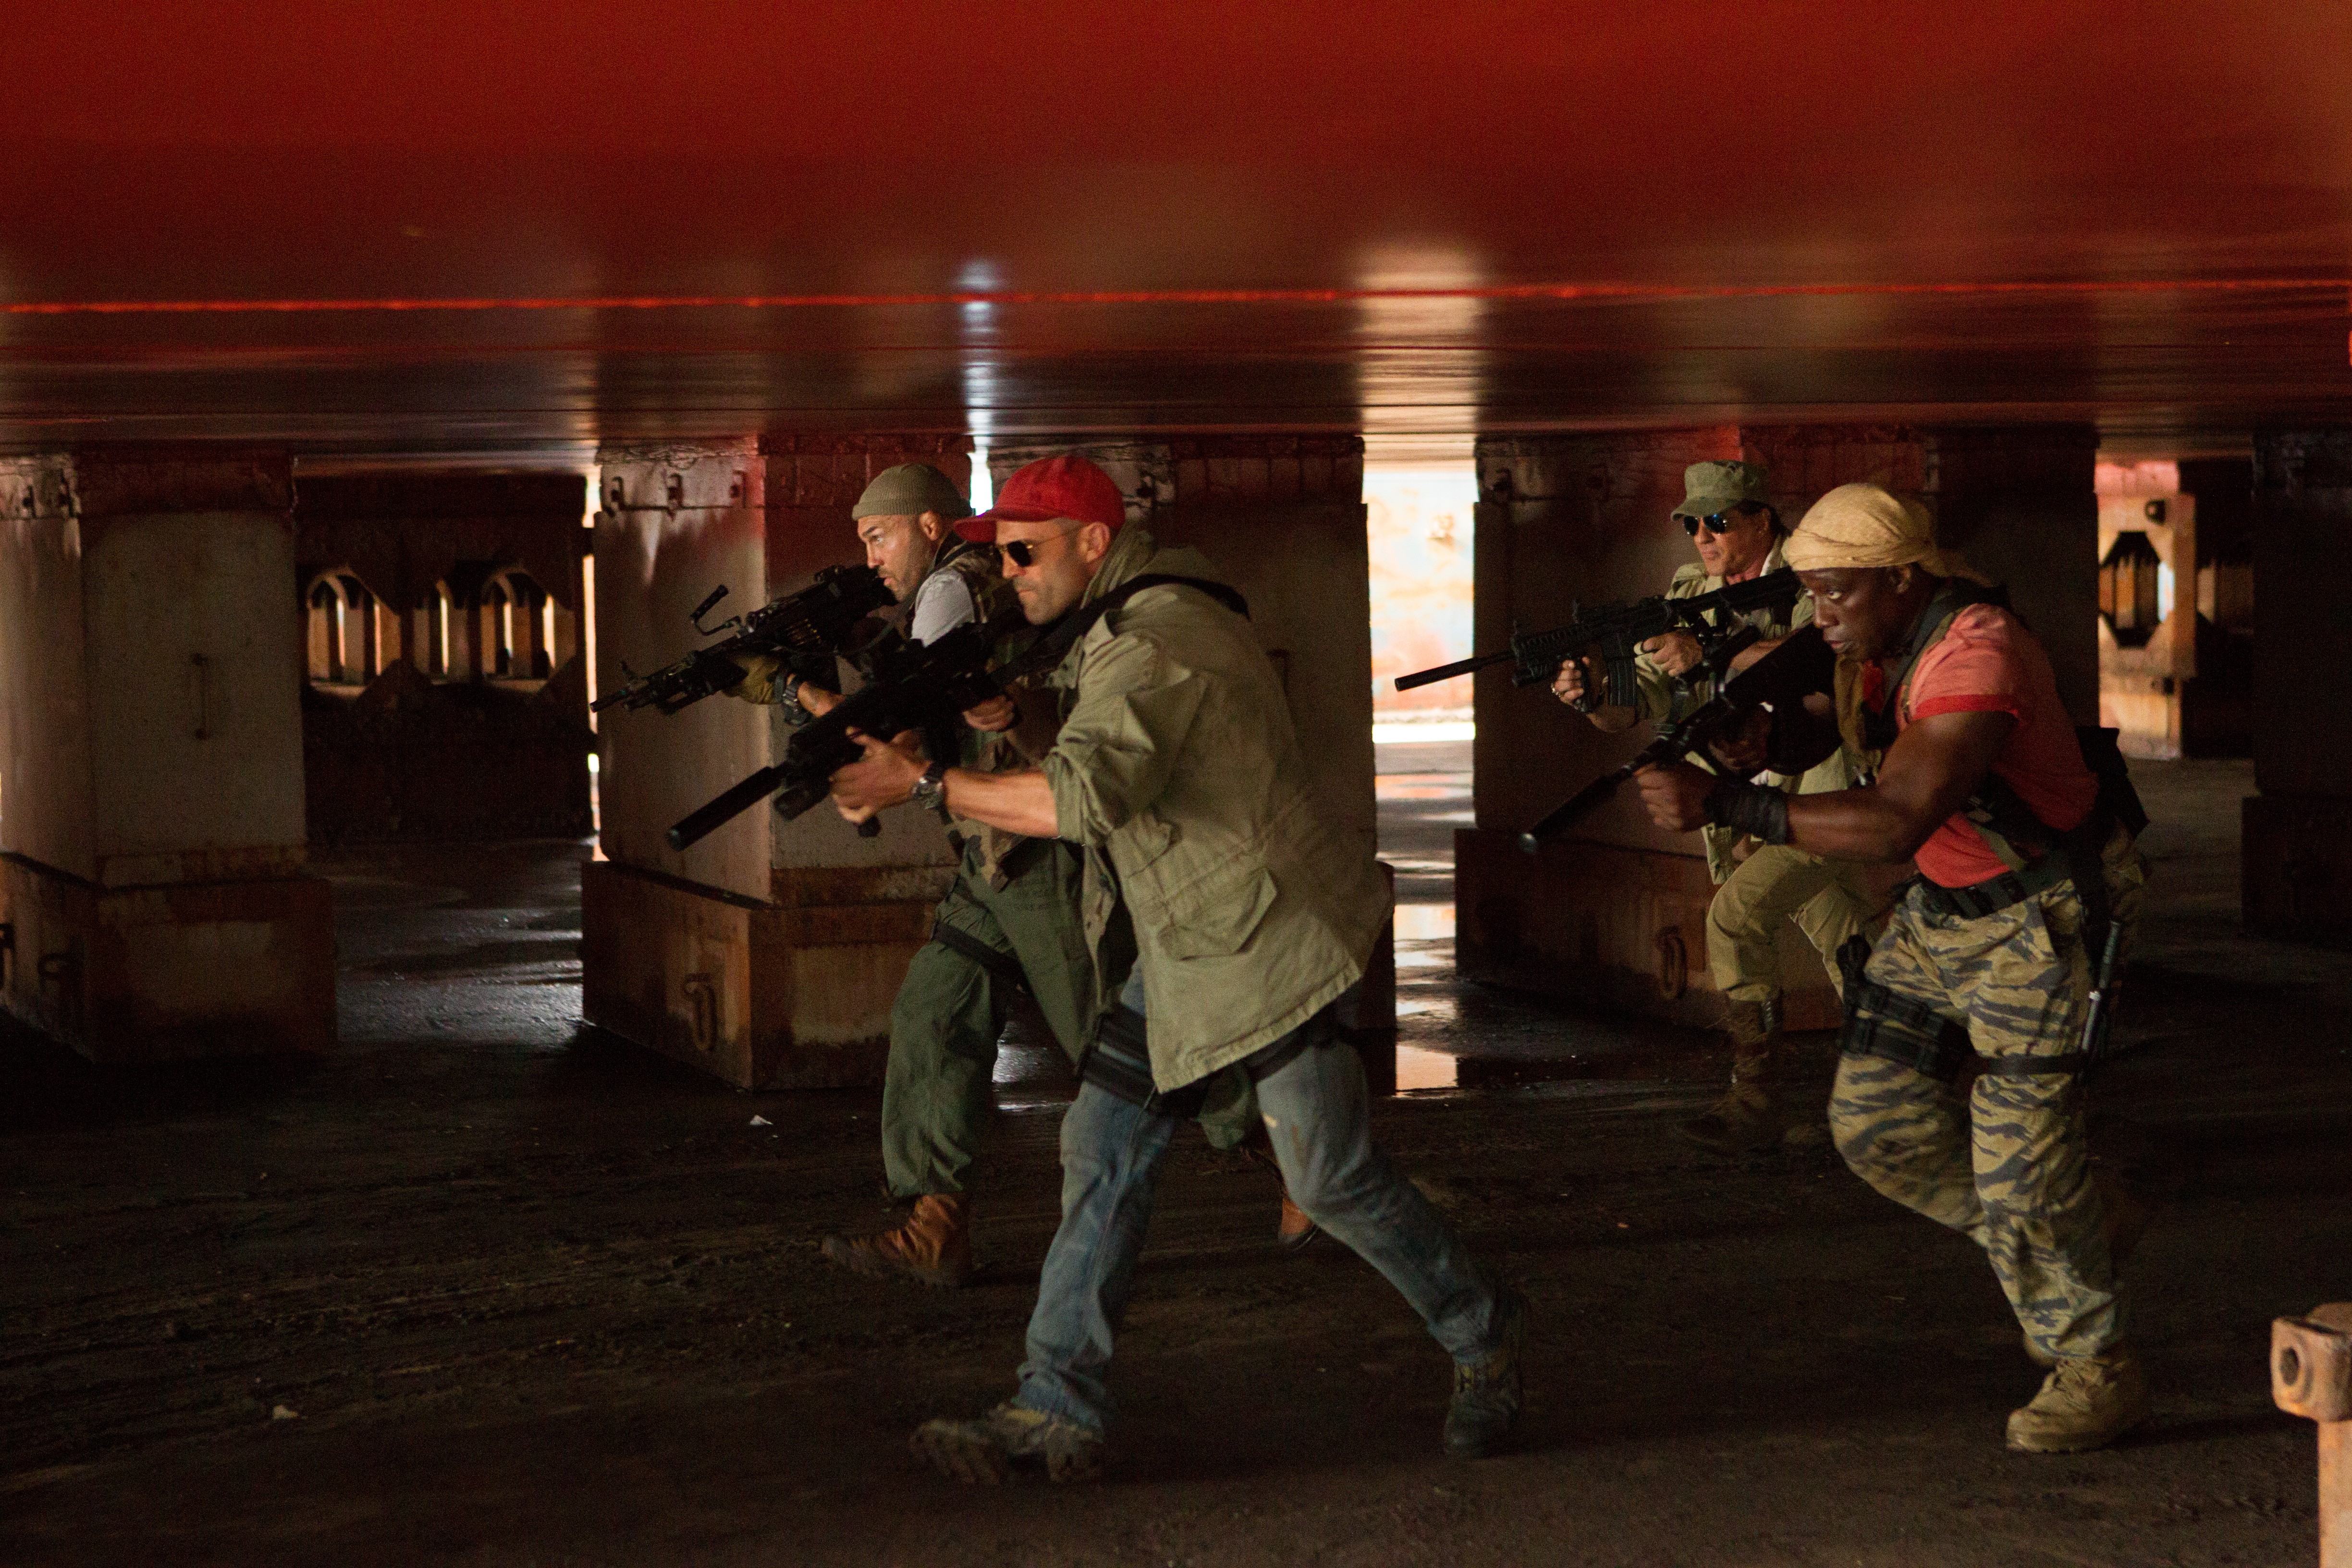 movie, the expendables 3, barney ross, doc (the expendables), jason statham, lee christmas, randy couture, sylvester stallone, toll road, wesley snipes, the expendables